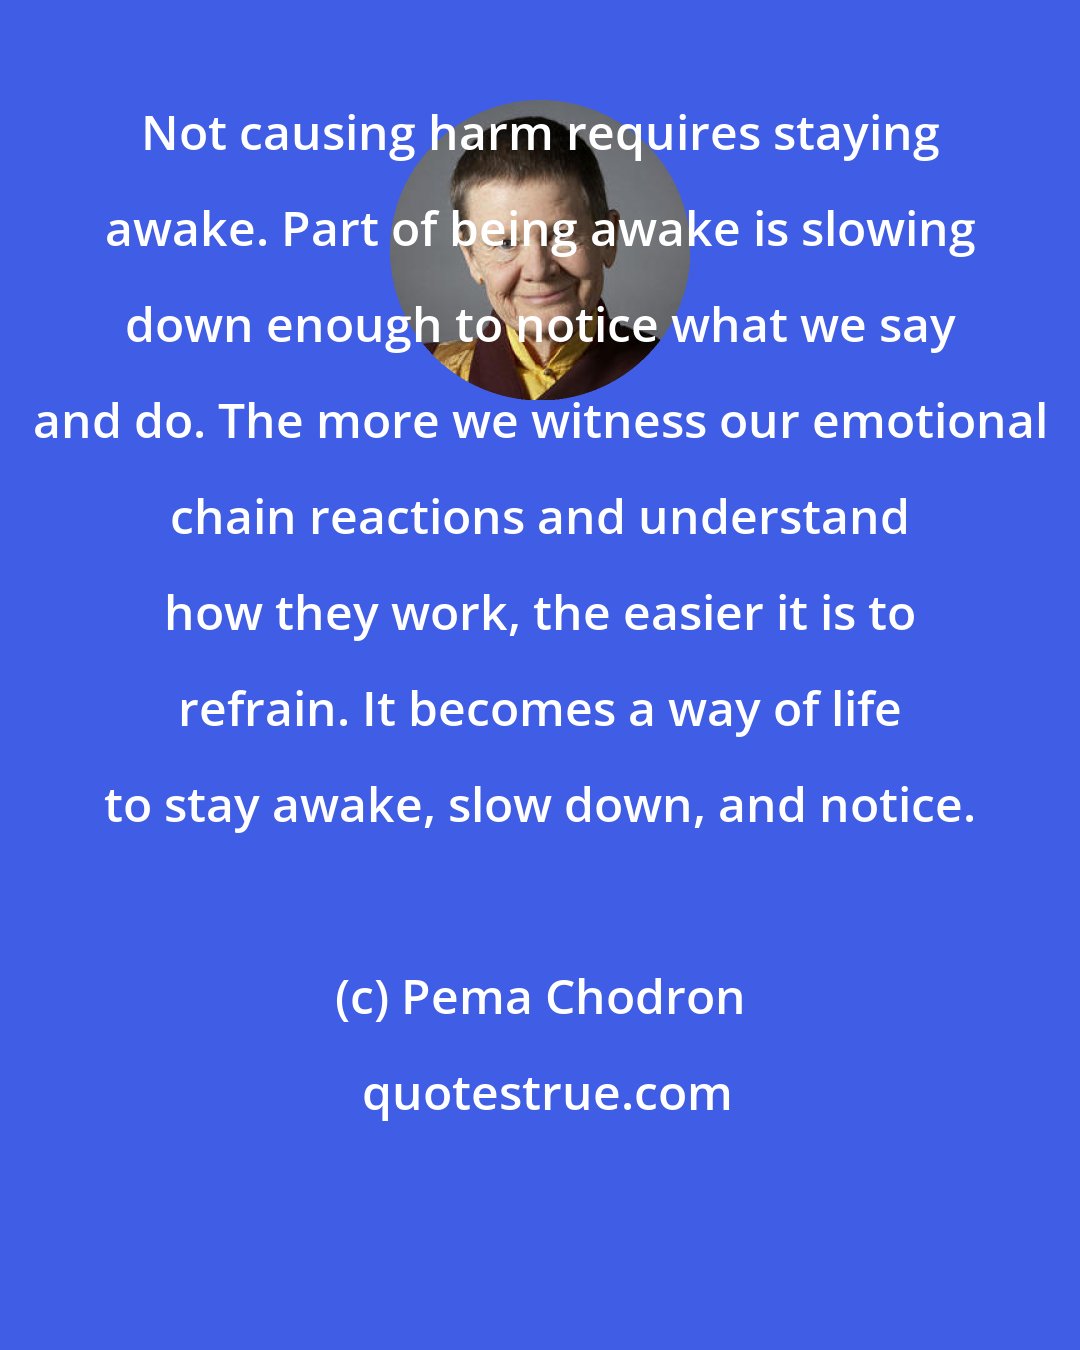 Pema Chodron: Not causing harm requires staying awake. Part of being awake is slowing down enough to notice what we say and do. The more we witness our emotional chain reactions and understand how they work, the easier it is to refrain. It becomes a way of life to stay awake, slow down, and notice.